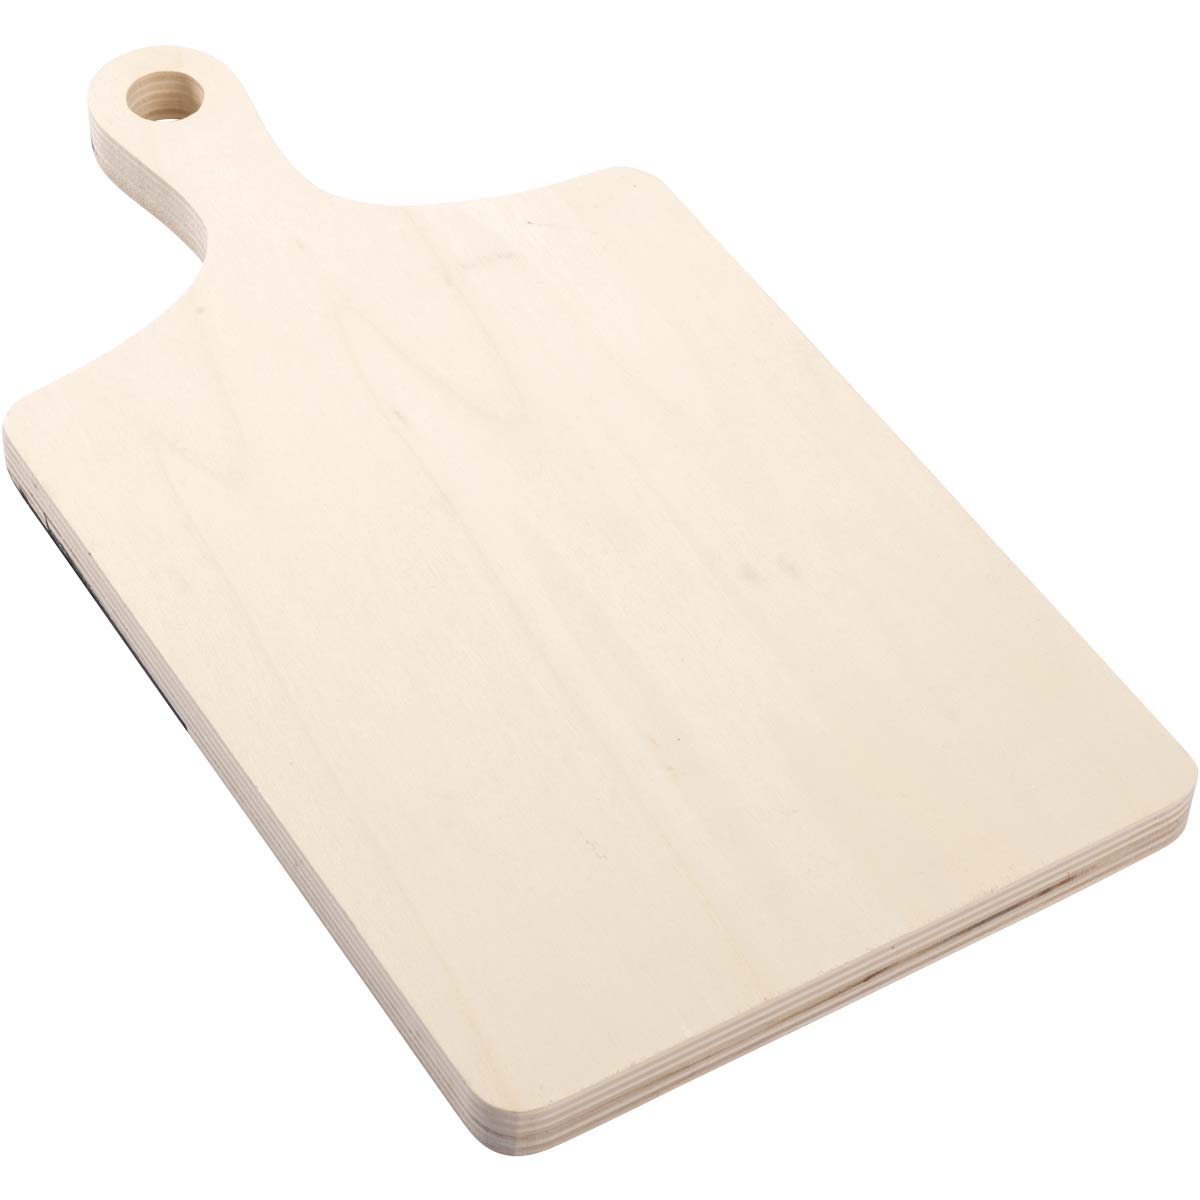 Plaid ® Wood Surfaces - Cutting Board Long Grip Handle - 56706